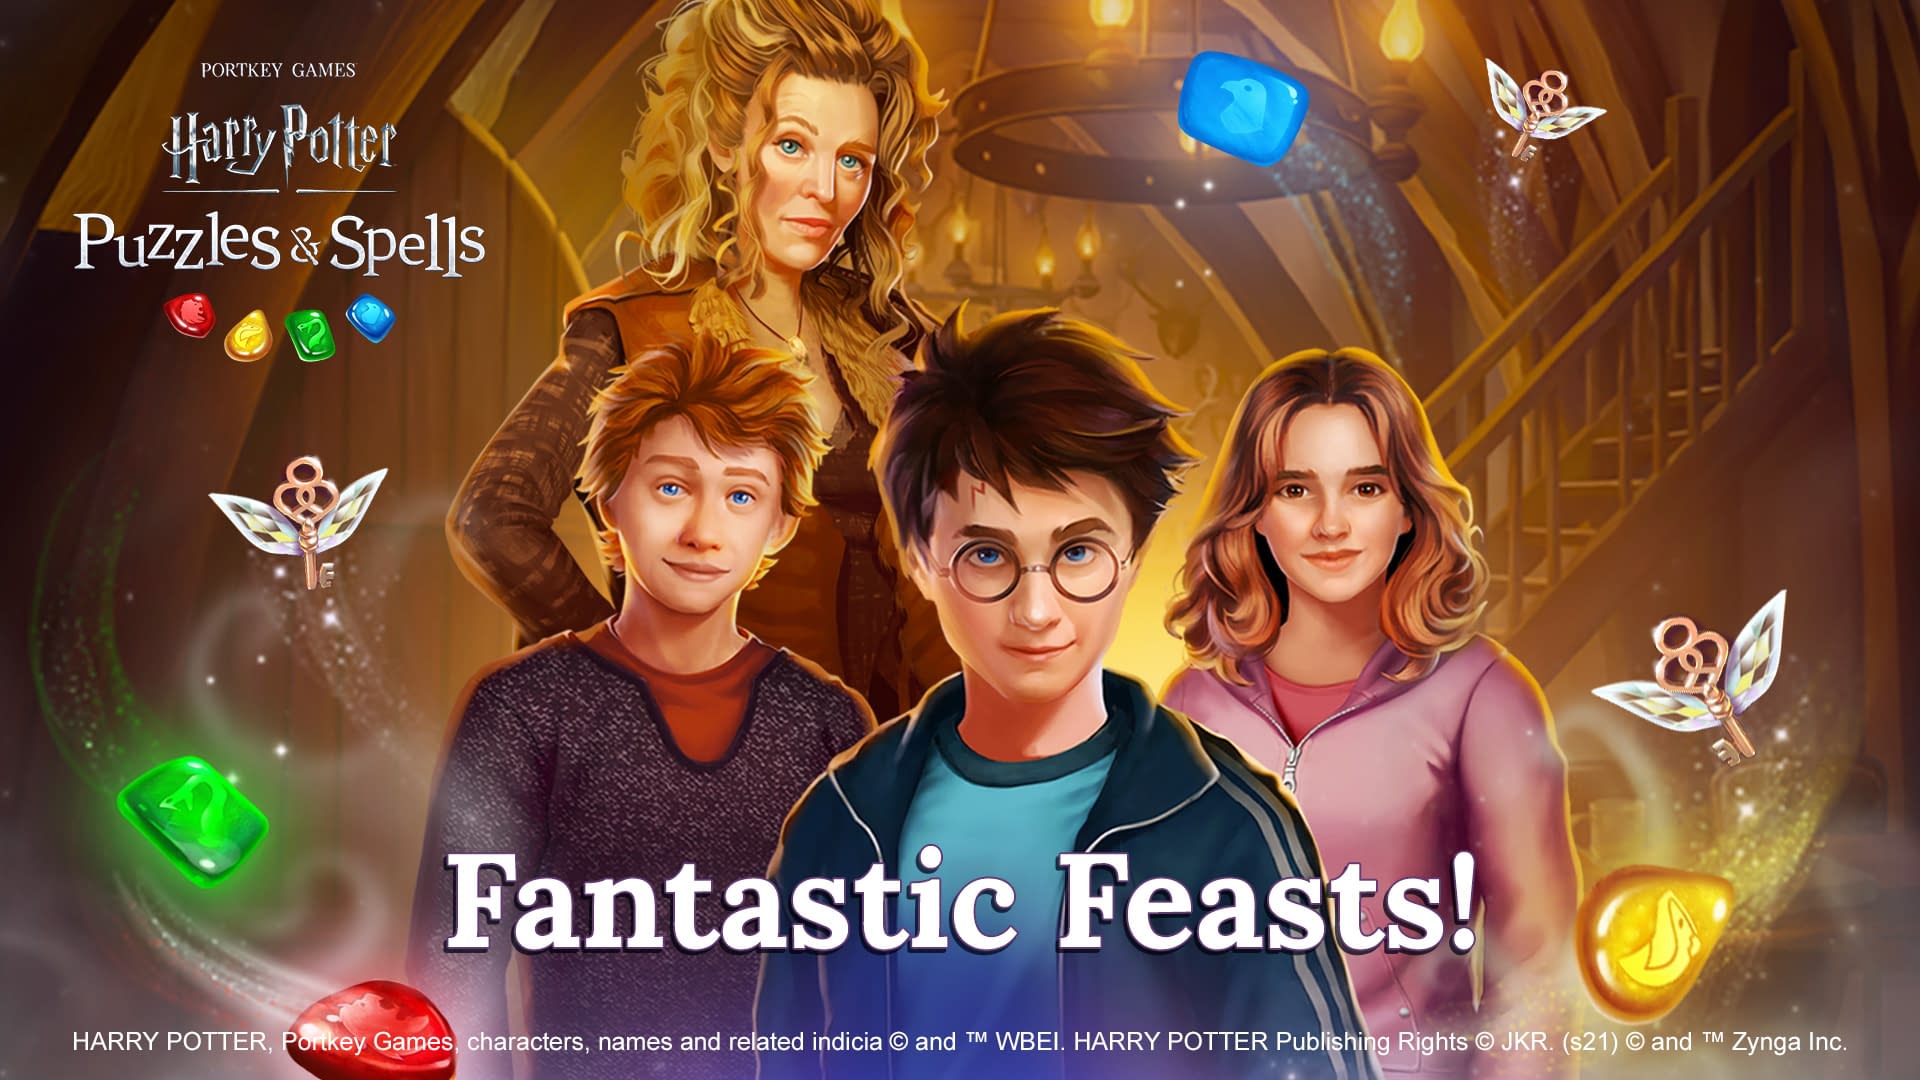 Harry Potter: Enigmas & Magia::Appstore for Android